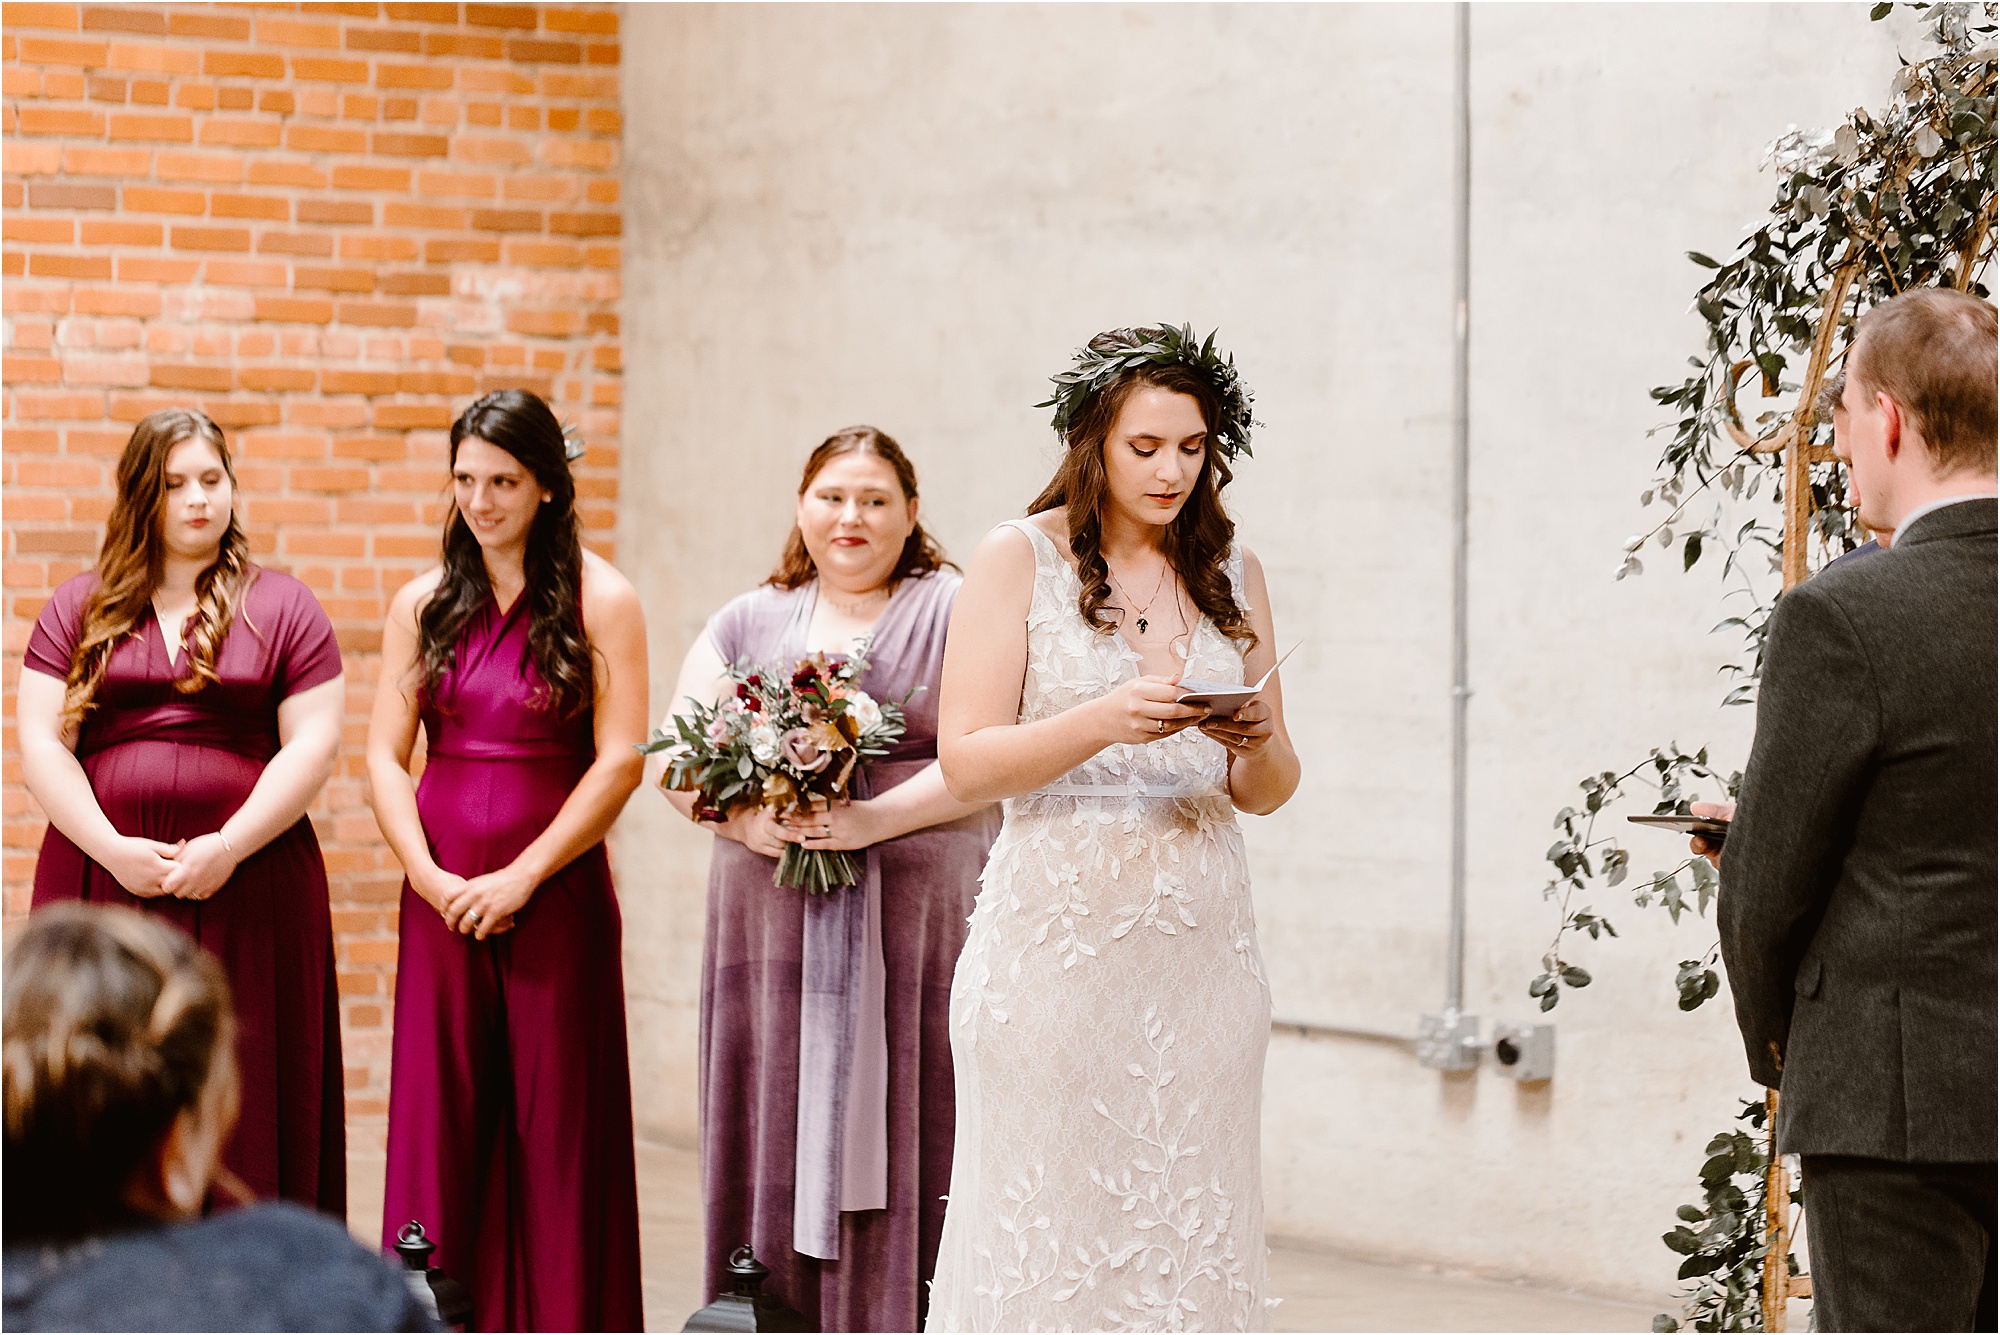 bride reads vows at wedding ceremony in front of bridesmaids in purple and burgundy dresses